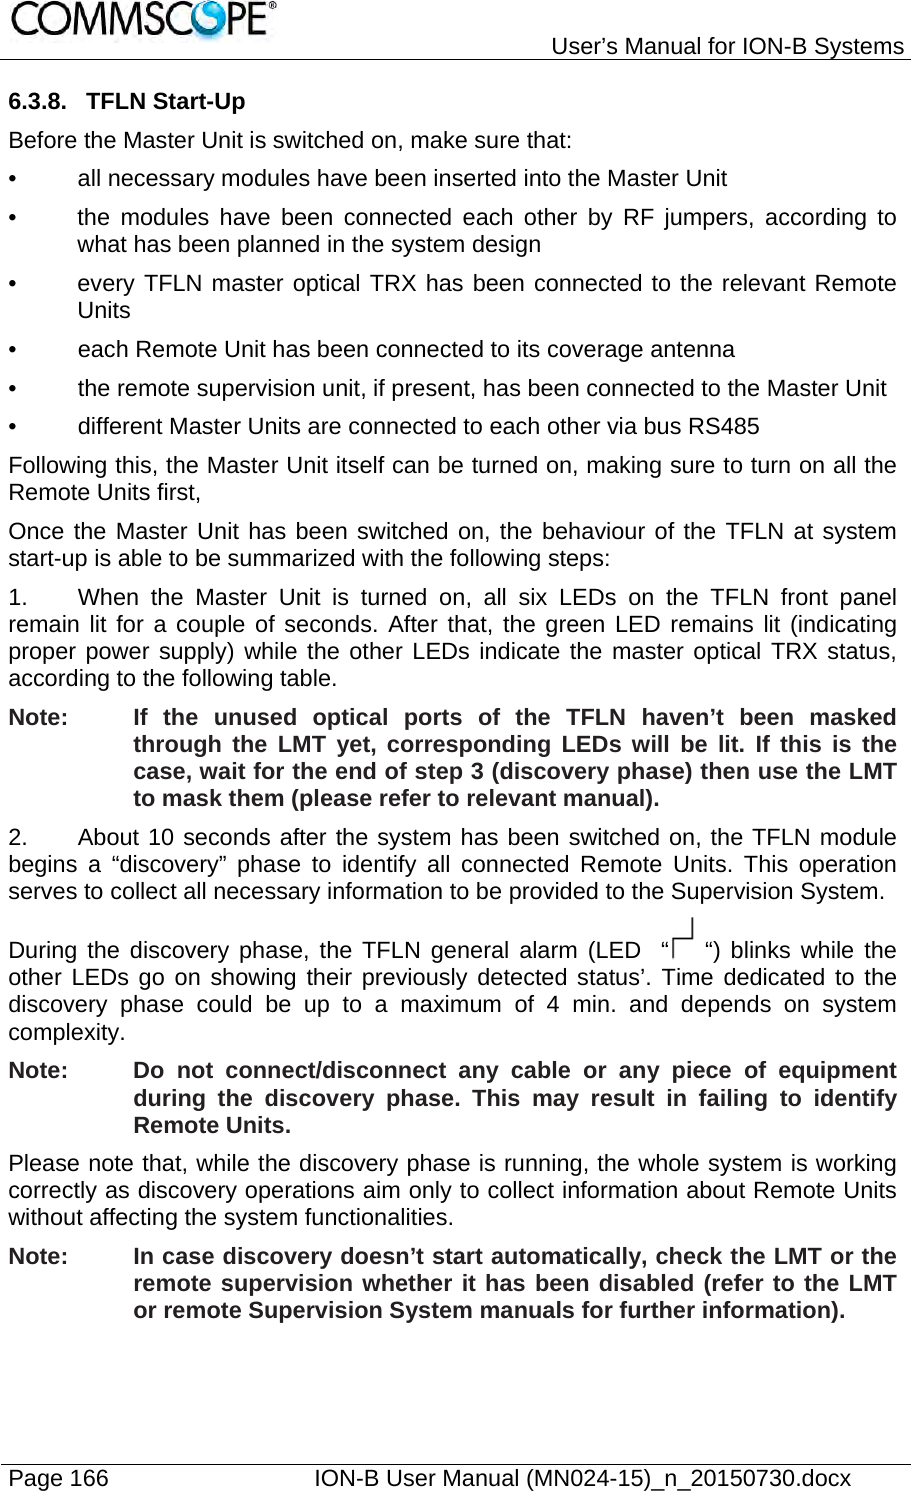   User’s Manual for ION-B Systems Page 166    ION-B User Manual (MN024-15)_n_20150730.docx  6.3.8. TFLN Start-Up Before the Master Unit is switched on, make sure that: •  all necessary modules have been inserted into the Master Unit •  the modules have been connected each other by RF jumpers, according to what has been planned in the system design •  every TFLN master optical TRX has been connected to the relevant Remote Units •  each Remote Unit has been connected to its coverage antenna •  the remote supervision unit, if present, has been connected to the Master Unit •  different Master Units are connected to each other via bus RS485 Following this, the Master Unit itself can be turned on, making sure to turn on all the Remote Units first,  Once the Master Unit has been switched on, the behaviour of the TFLN at system start-up is able to be summarized with the following steps: 1.  When the Master Unit is turned on, all six LEDs on the TFLN front panel remain lit for a couple of seconds. After that, the green LED remains lit (indicating proper power supply) while the other LEDs indicate the master optical TRX status, according to the following table. Note:  If the unused optical ports of the TFLN haven’t been masked through the LMT yet, corresponding LEDs will be lit. If this is the case, wait for the end of step 3 (discovery phase) then use the LMT to mask them (please refer to relevant manual). 2.  About 10 seconds after the system has been switched on, the TFLN module begins a “discovery” phase to identify all connected Remote Units. This operation serves to collect all necessary information to be provided to the Supervision System. During the discovery phase, the TFLN general alarm (LED  “  “) blinks while the other LEDs go on showing their previously detected status’. Time dedicated to the discovery phase could be up to a maximum of 4 min. and depends on system complexity. Note:  Do not connect/disconnect any cable or any piece of equipment during the discovery phase. This may result in failing to identify Remote Units. Please note that, while the discovery phase is running, the whole system is working correctly as discovery operations aim only to collect information about Remote Units without affecting the system functionalities. Note:  In case discovery doesn’t start automatically, check the LMT or the remote supervision whether it has been disabled (refer to the LMT or remote Supervision System manuals for further information).  